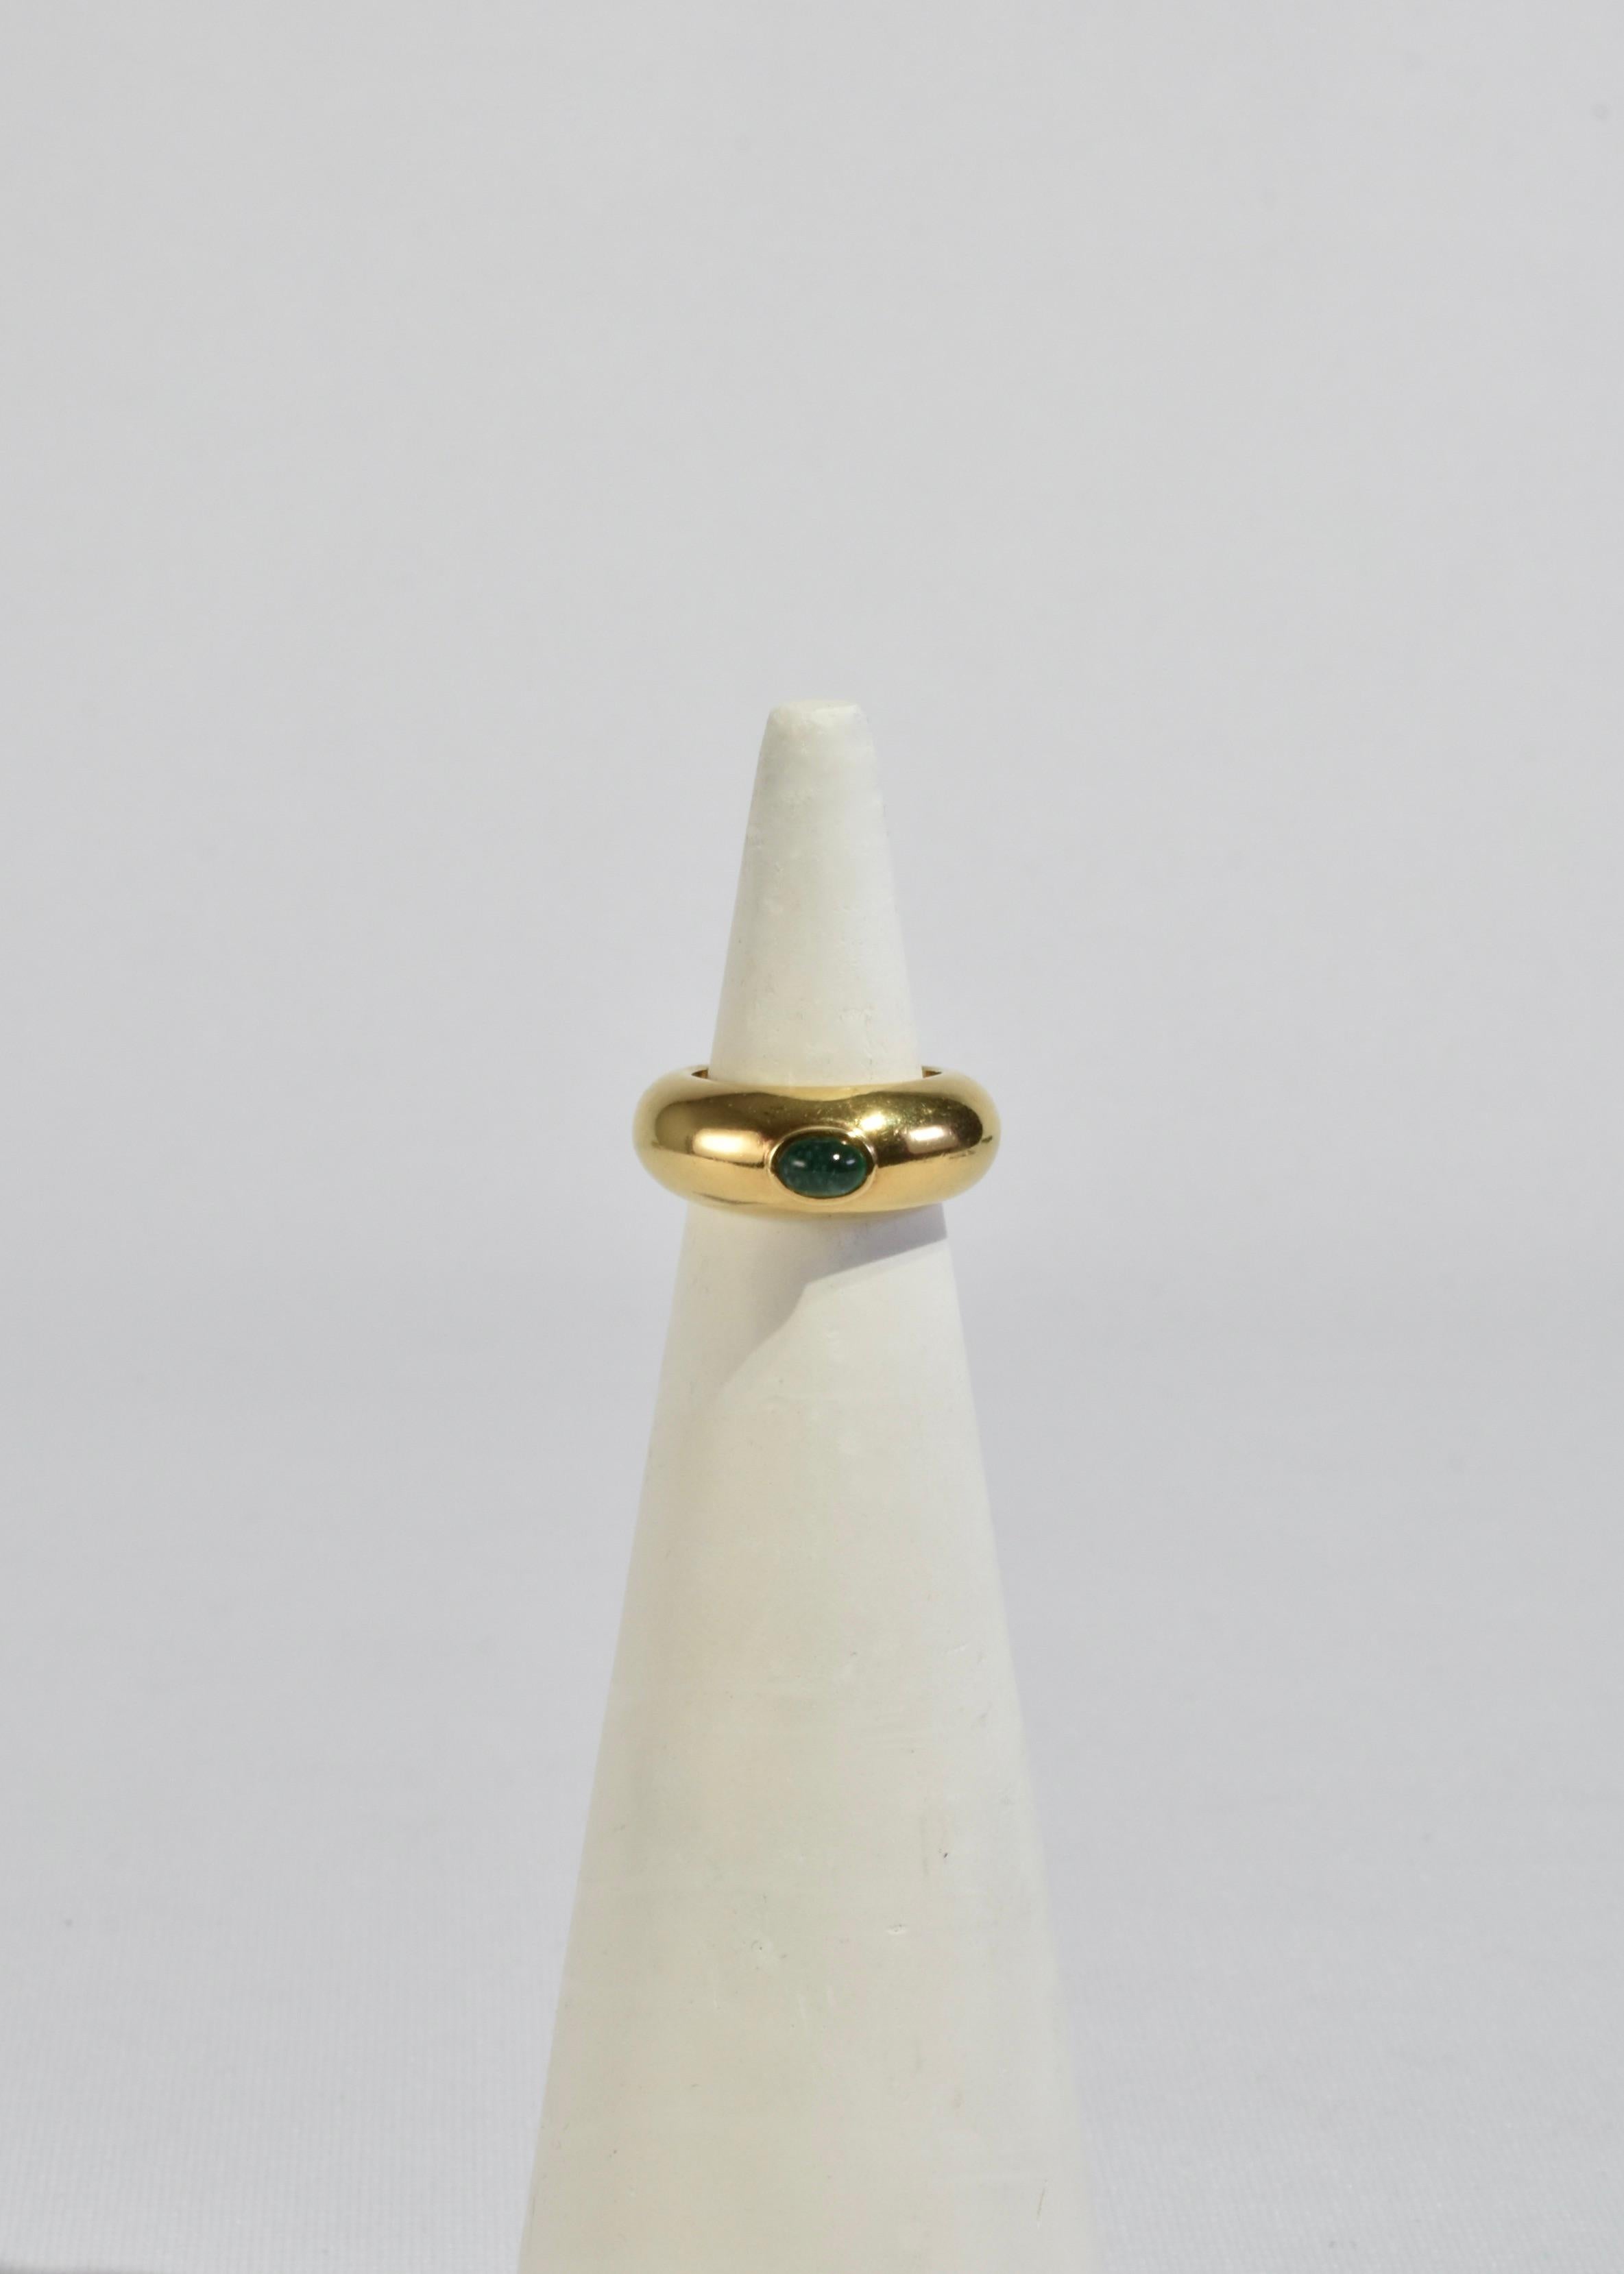 Stunning vintage gold ring with emerald cabochon, stamped 18k.

Material: 18k gold, emerald.